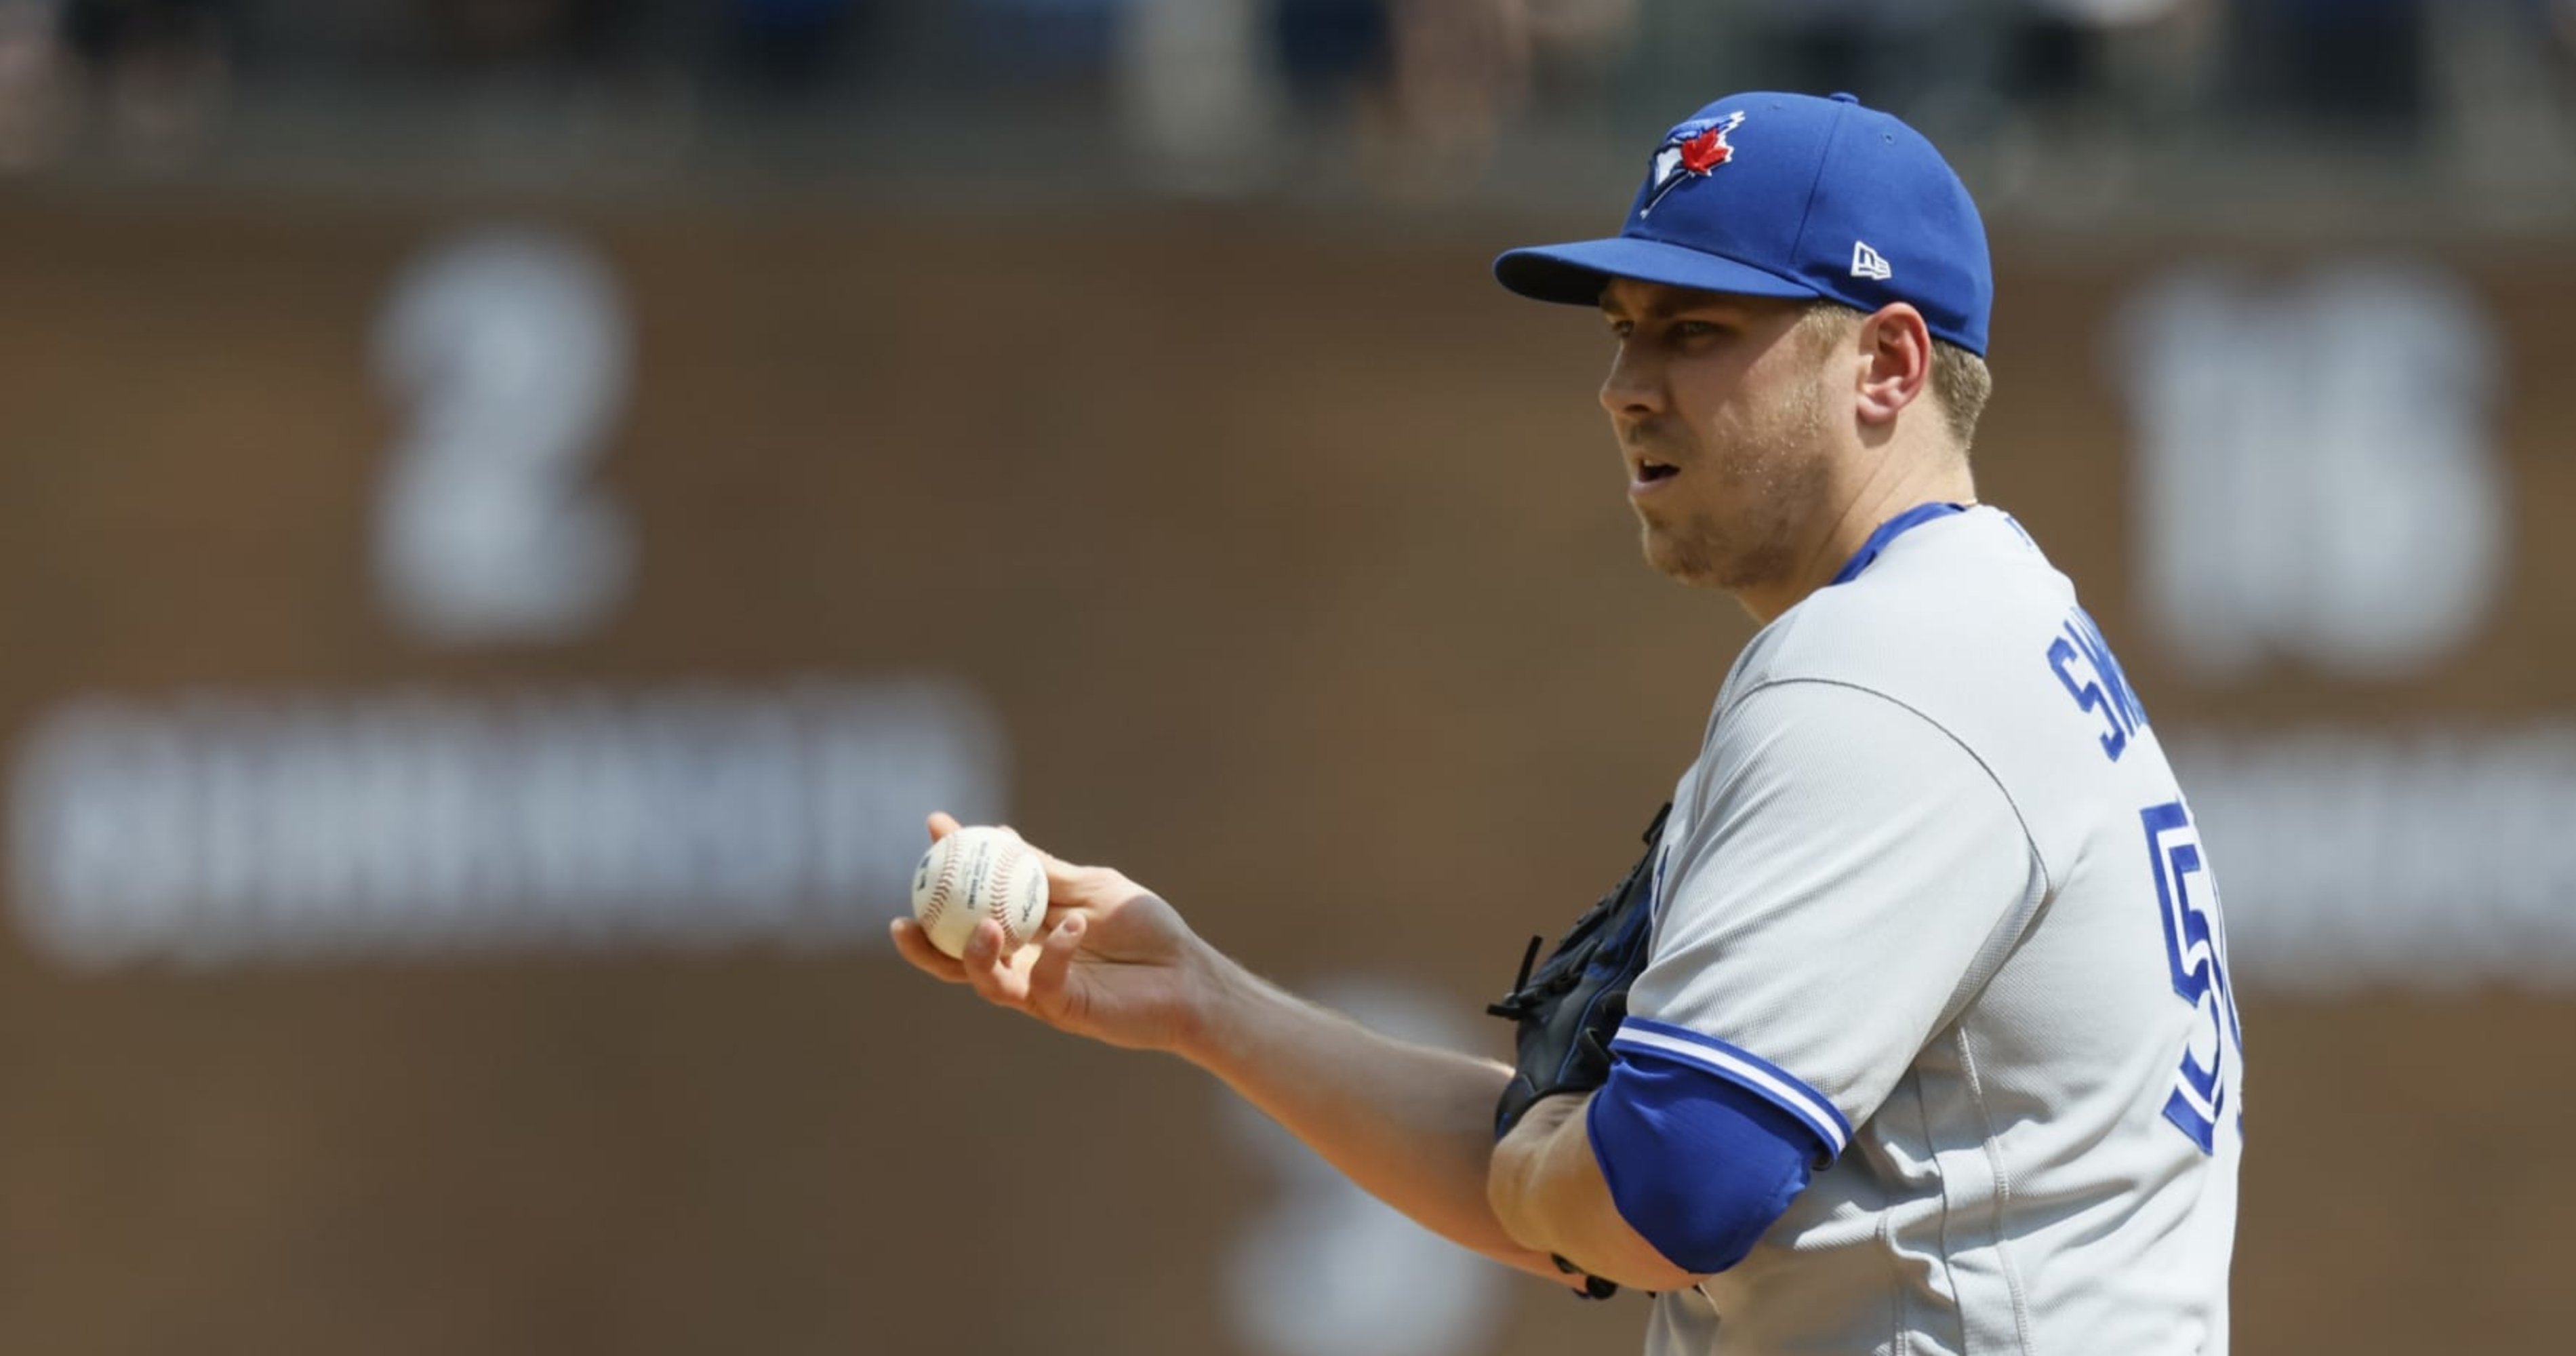 4-year-old son of Toronto Blue Jays pitcher in critical condition